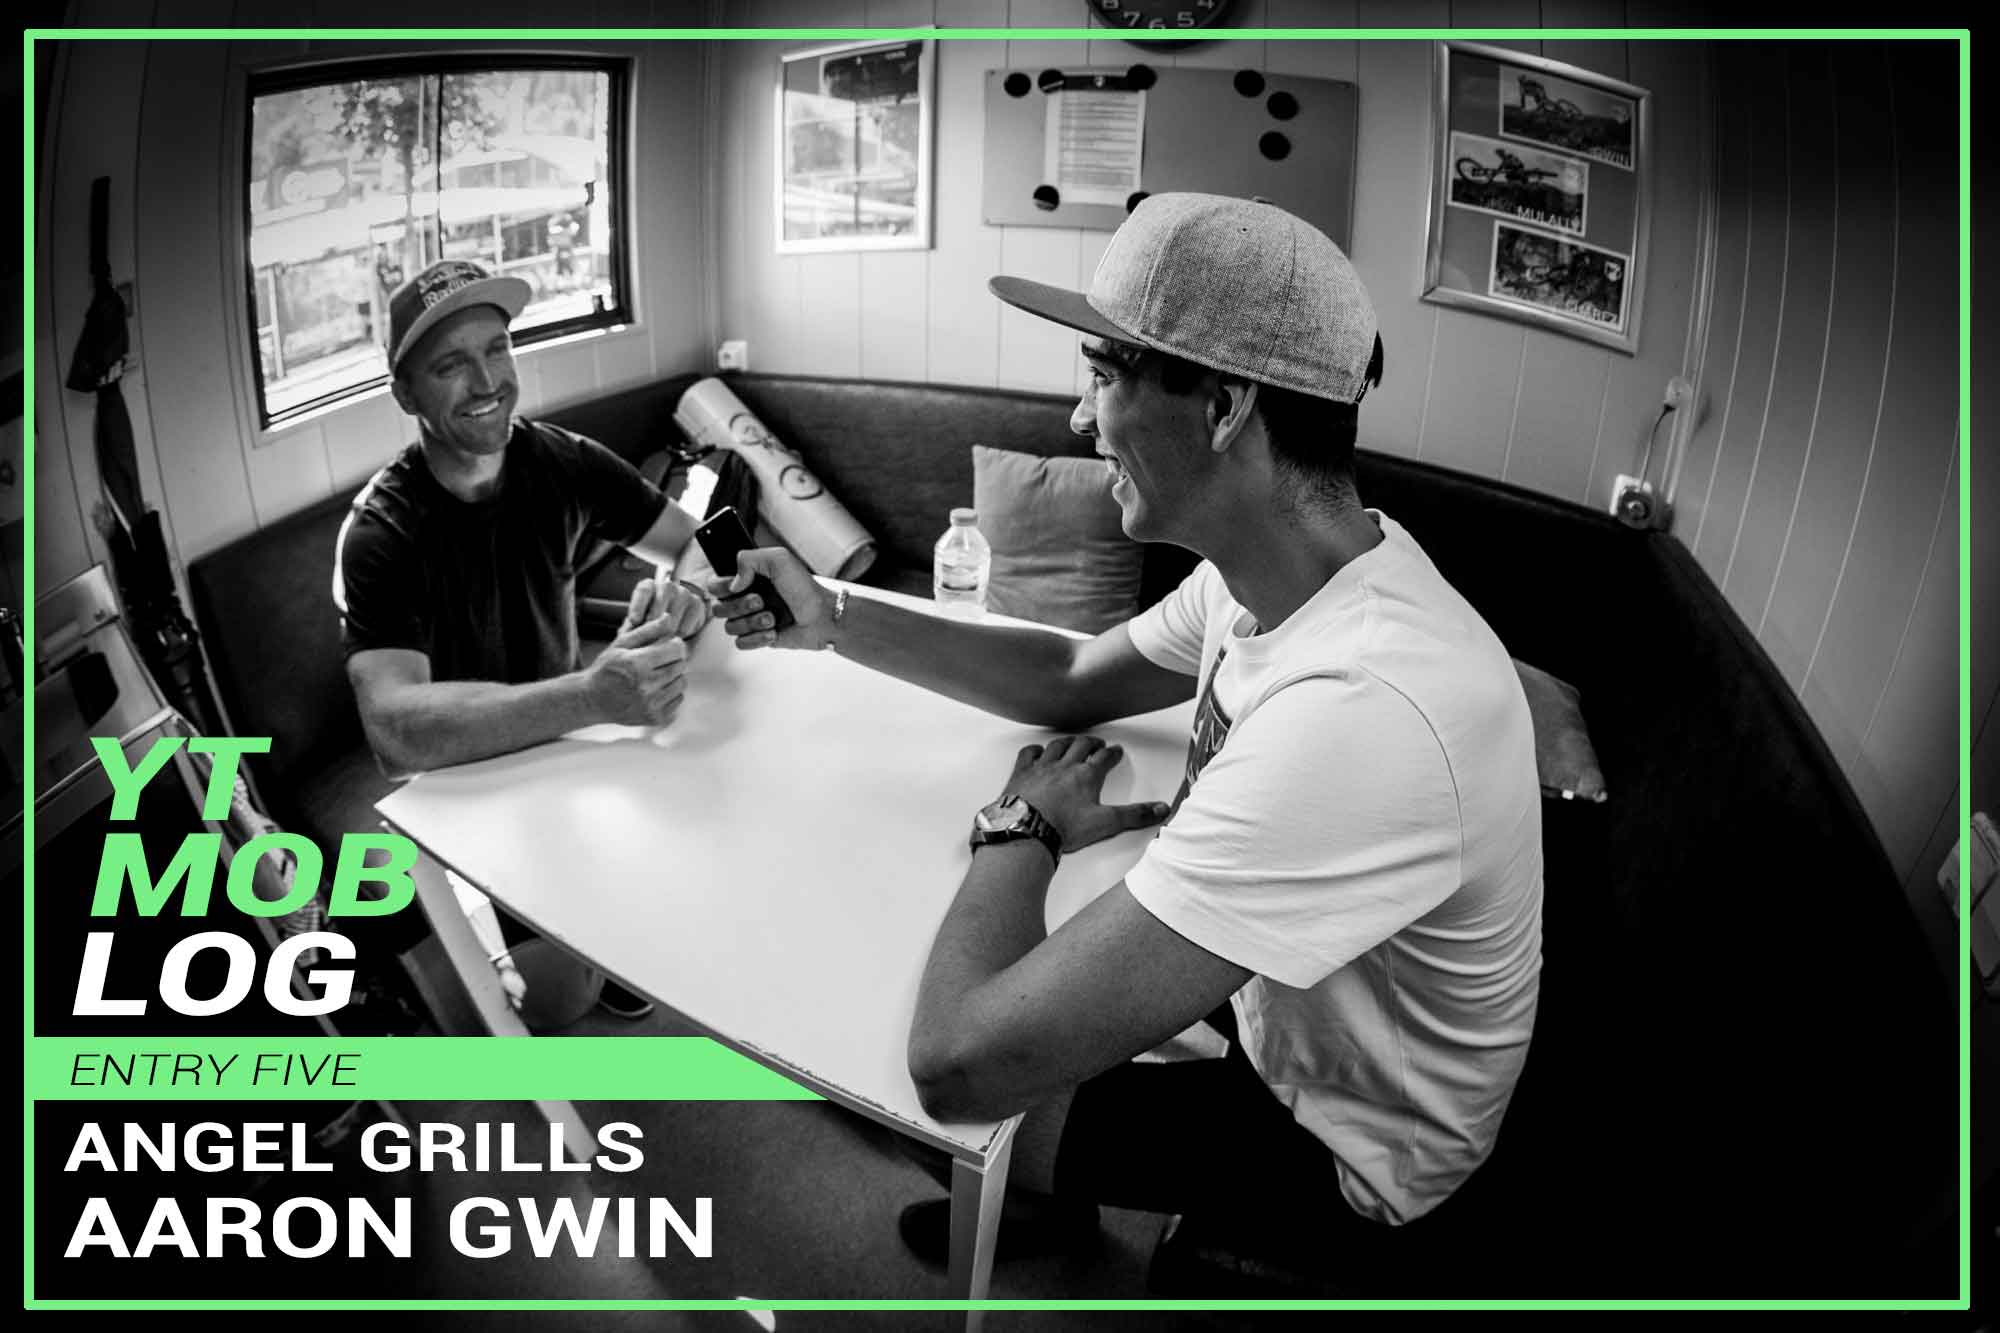 YT Mob Log: Entry Five - Angel Grills Aaron Gwin